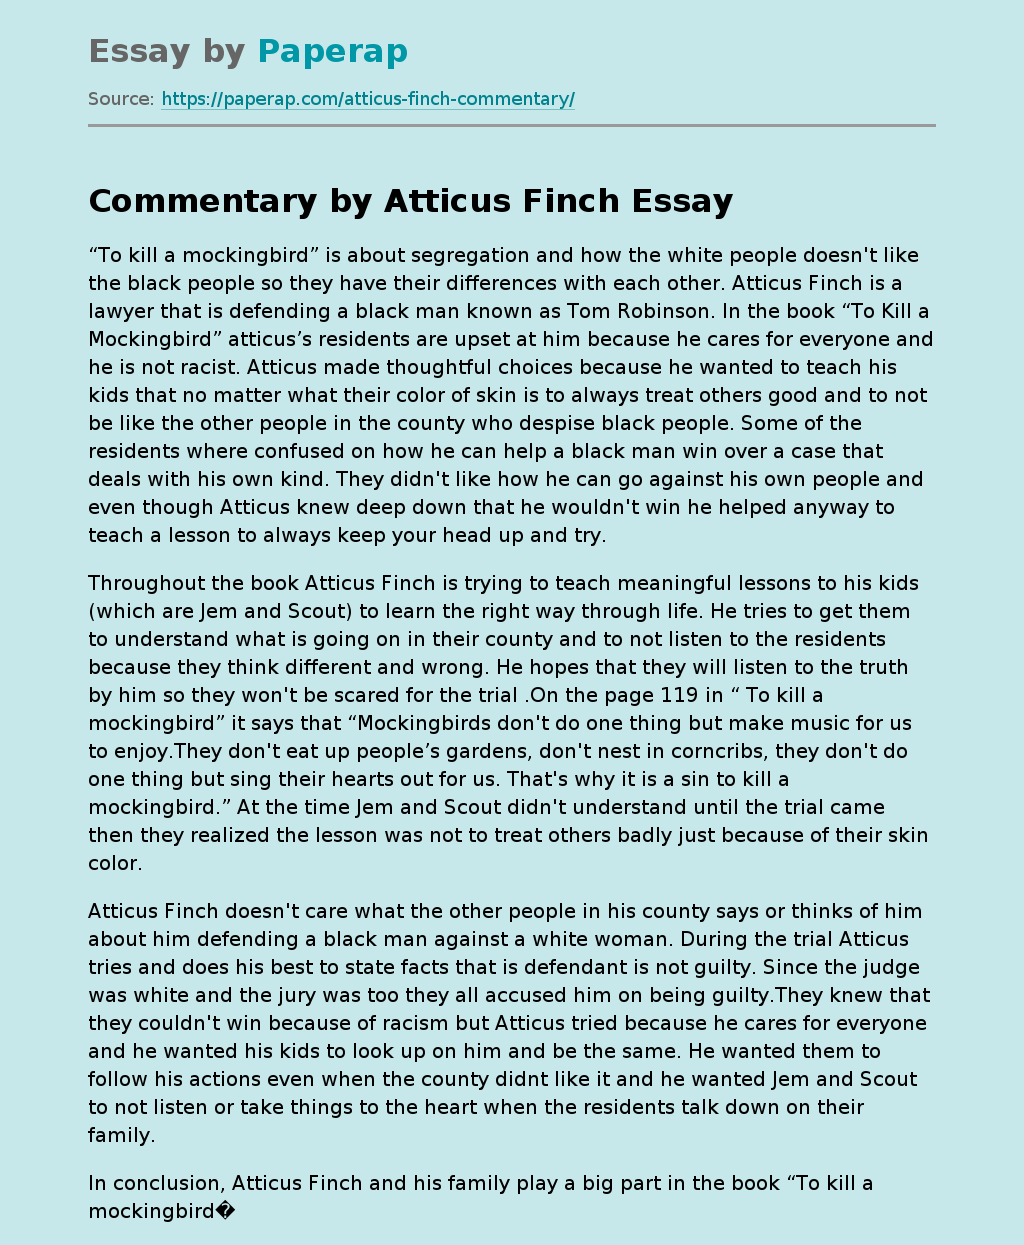 Commentary by Atticus Finch